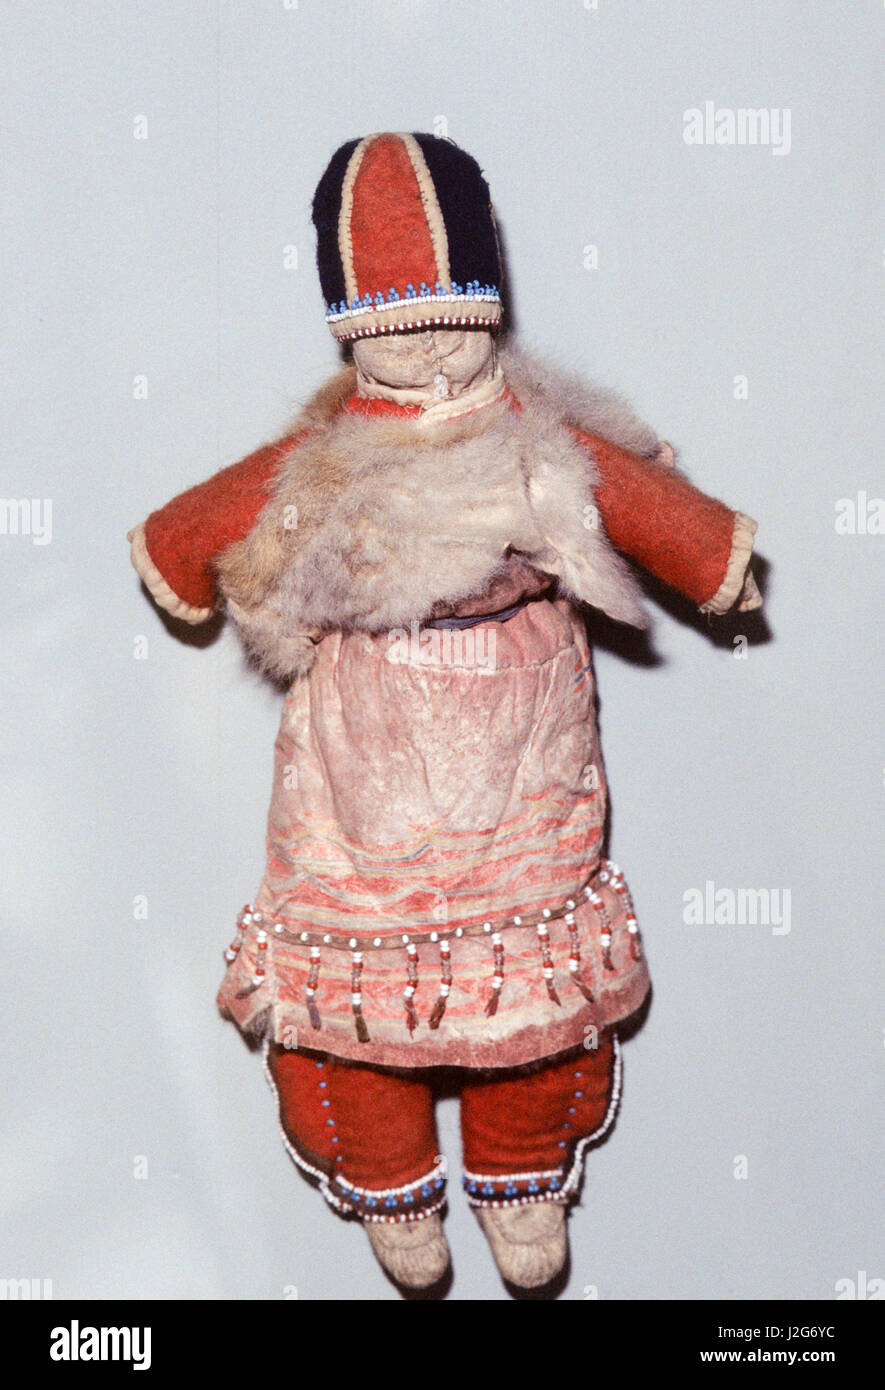 Native American Athabaskan artifact of a doll in traditional clothing that shows Russian influence. Alaska Stock Photo